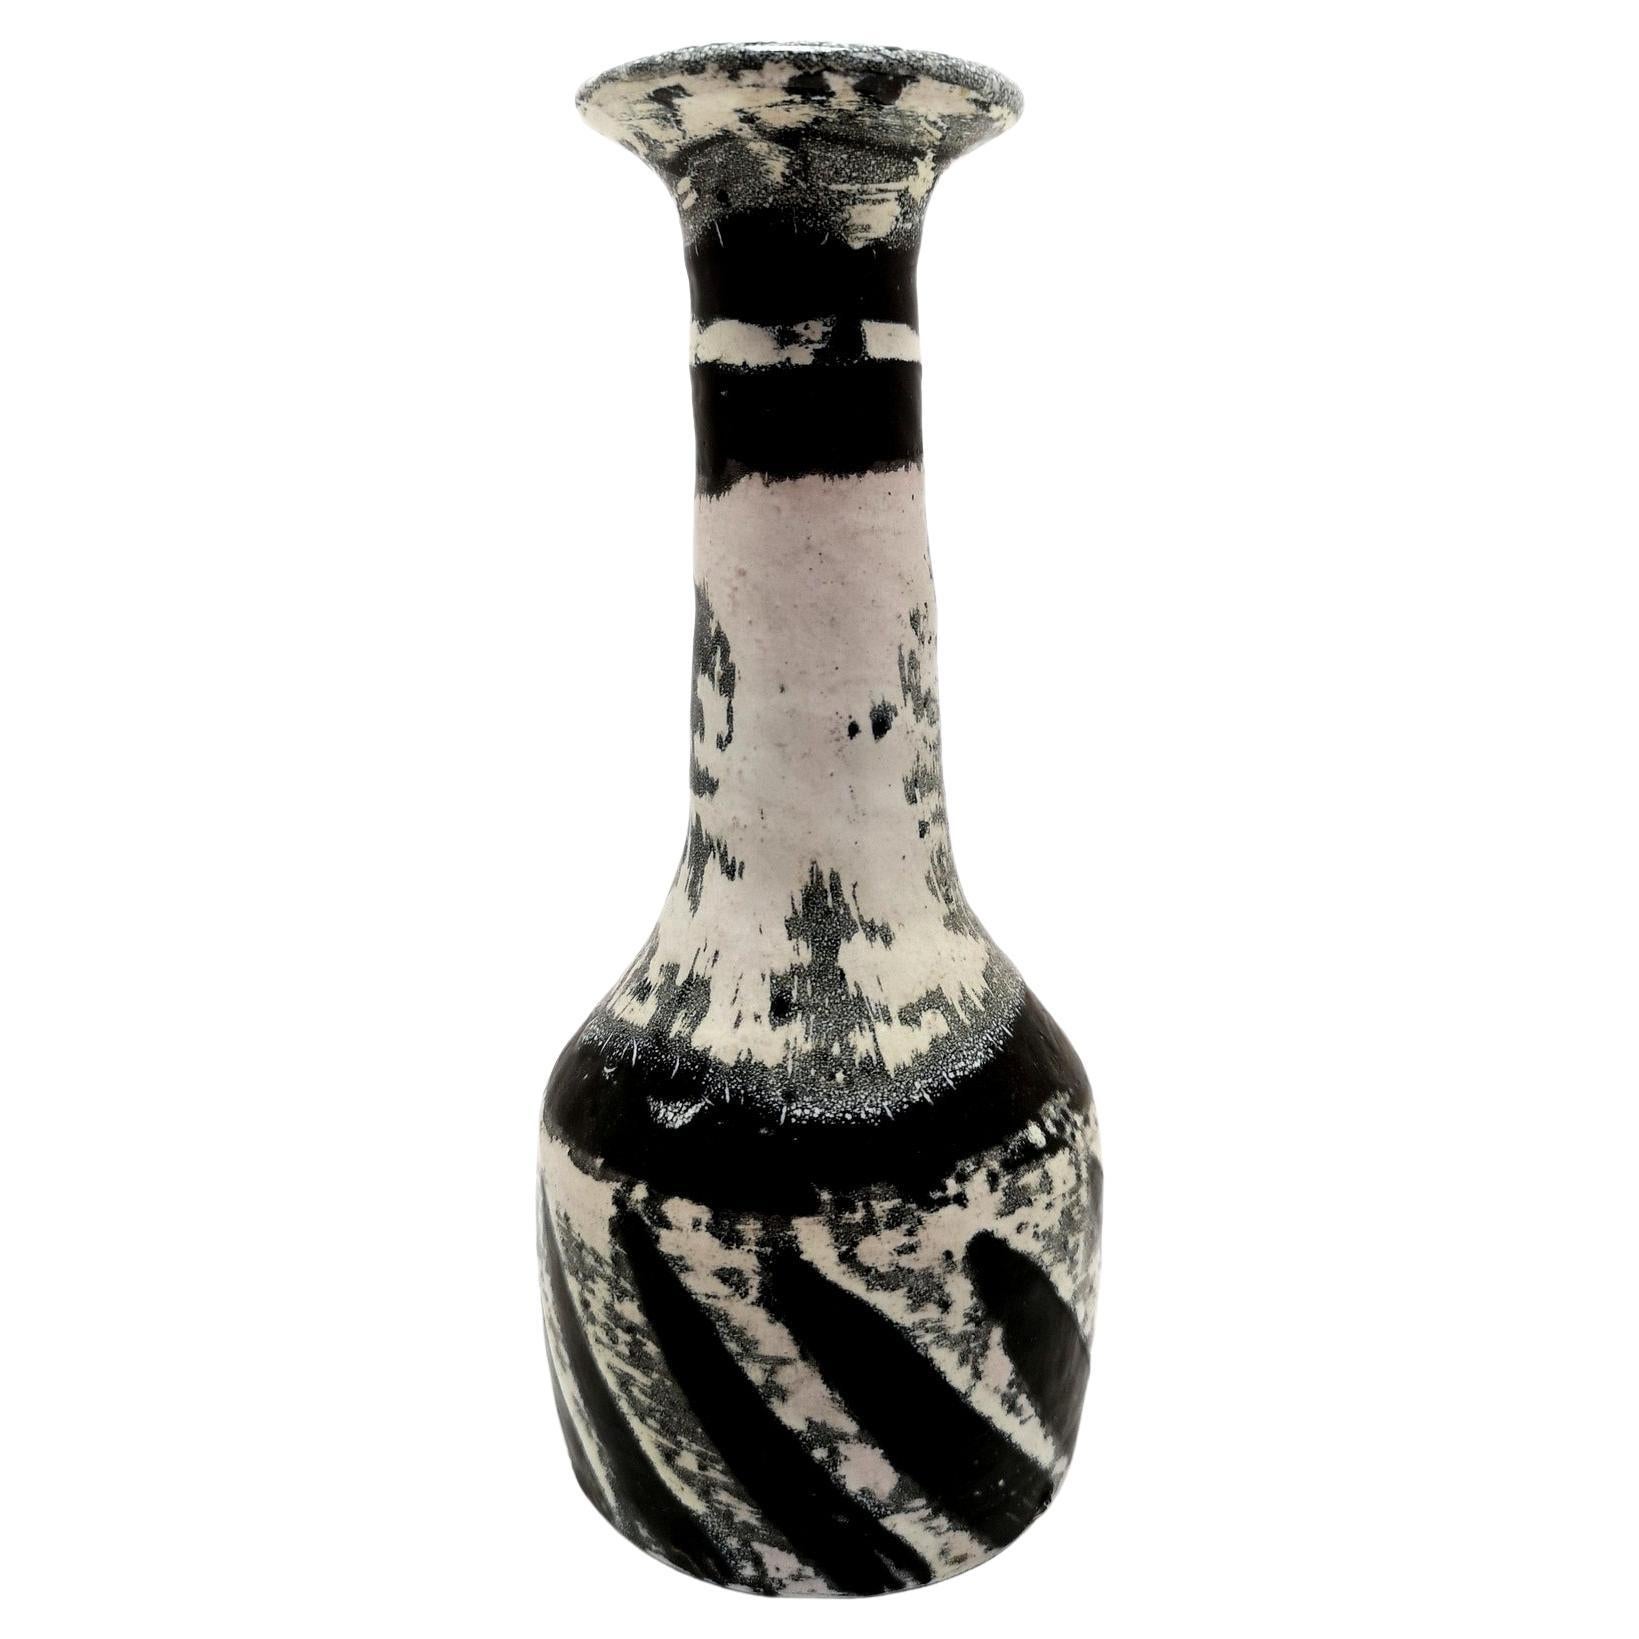 Small Greyscale Mid-Century Modern Vase by Livia Gorka, 1970s For Sale